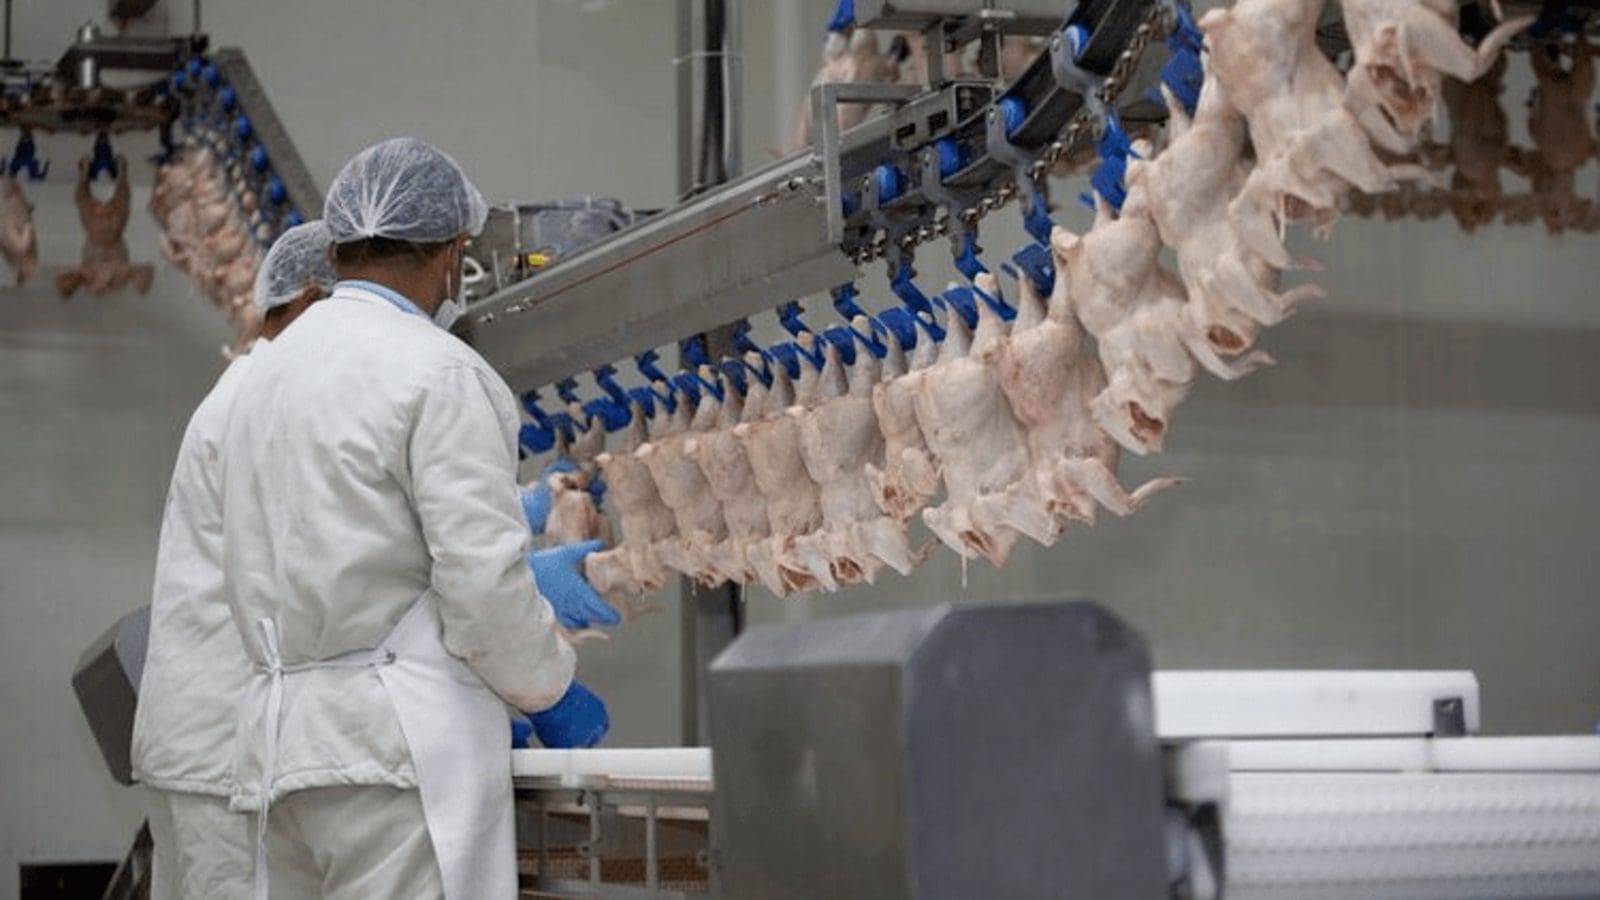 Tyson Foods channels US$90M into expanding Mississippi plant to increase capacity